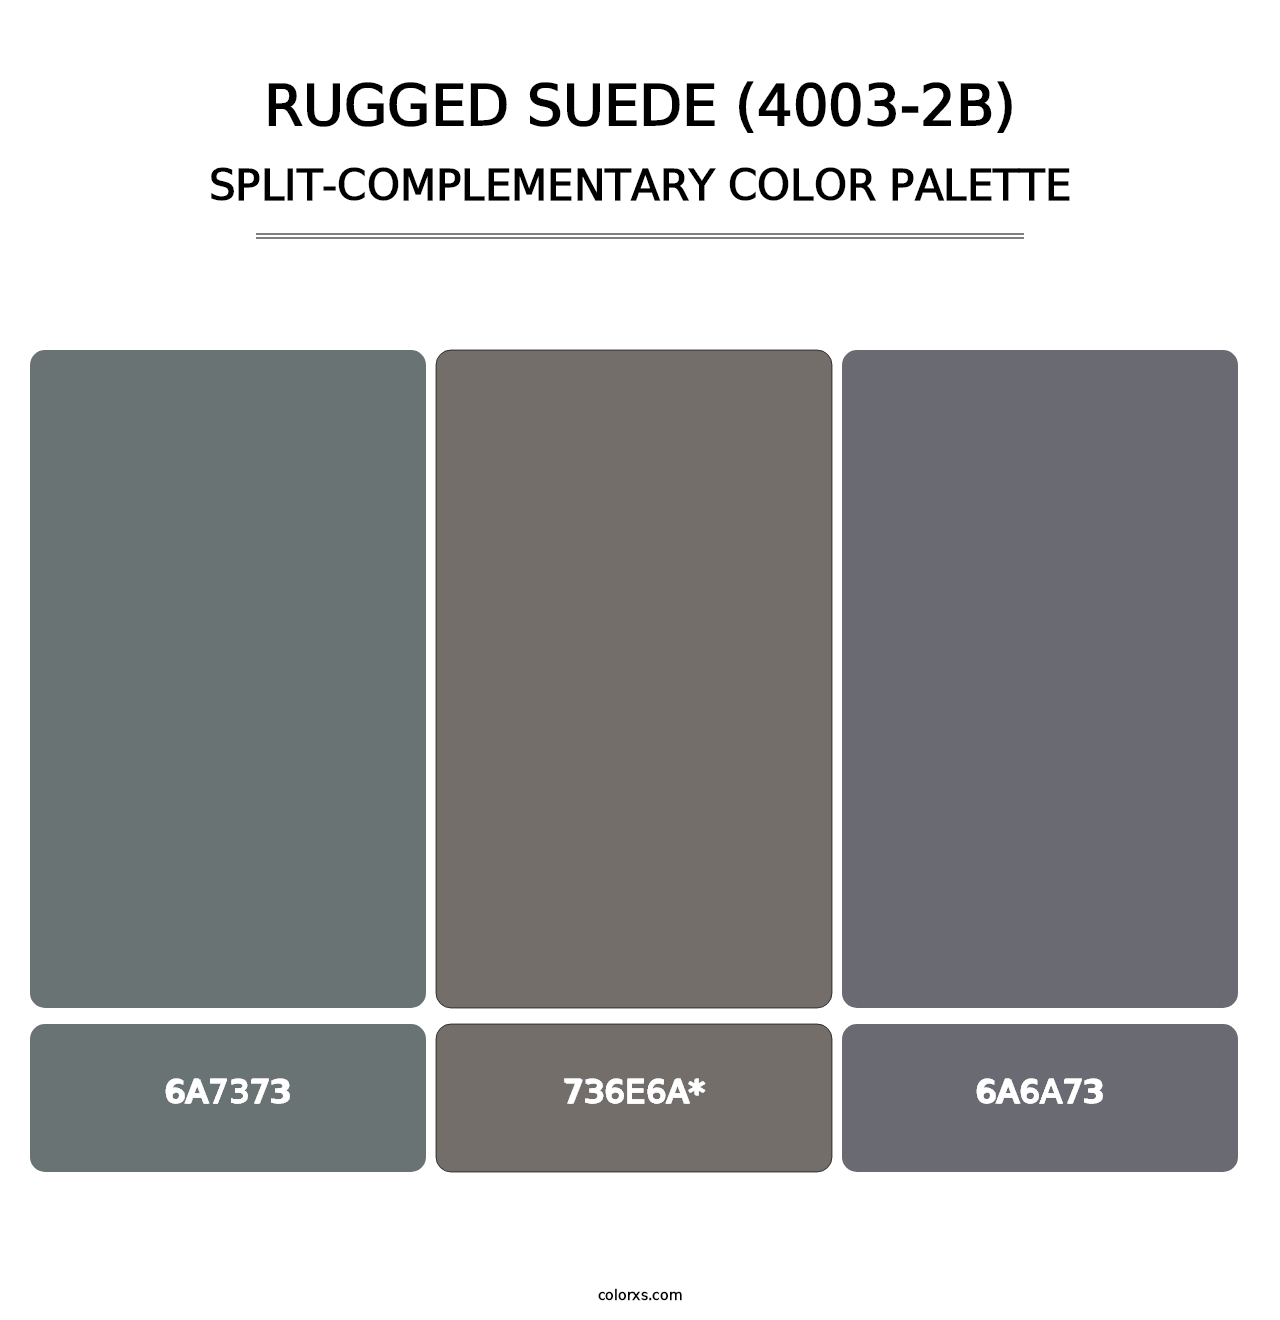 Rugged Suede (4003-2B) - Split-Complementary Color Palette